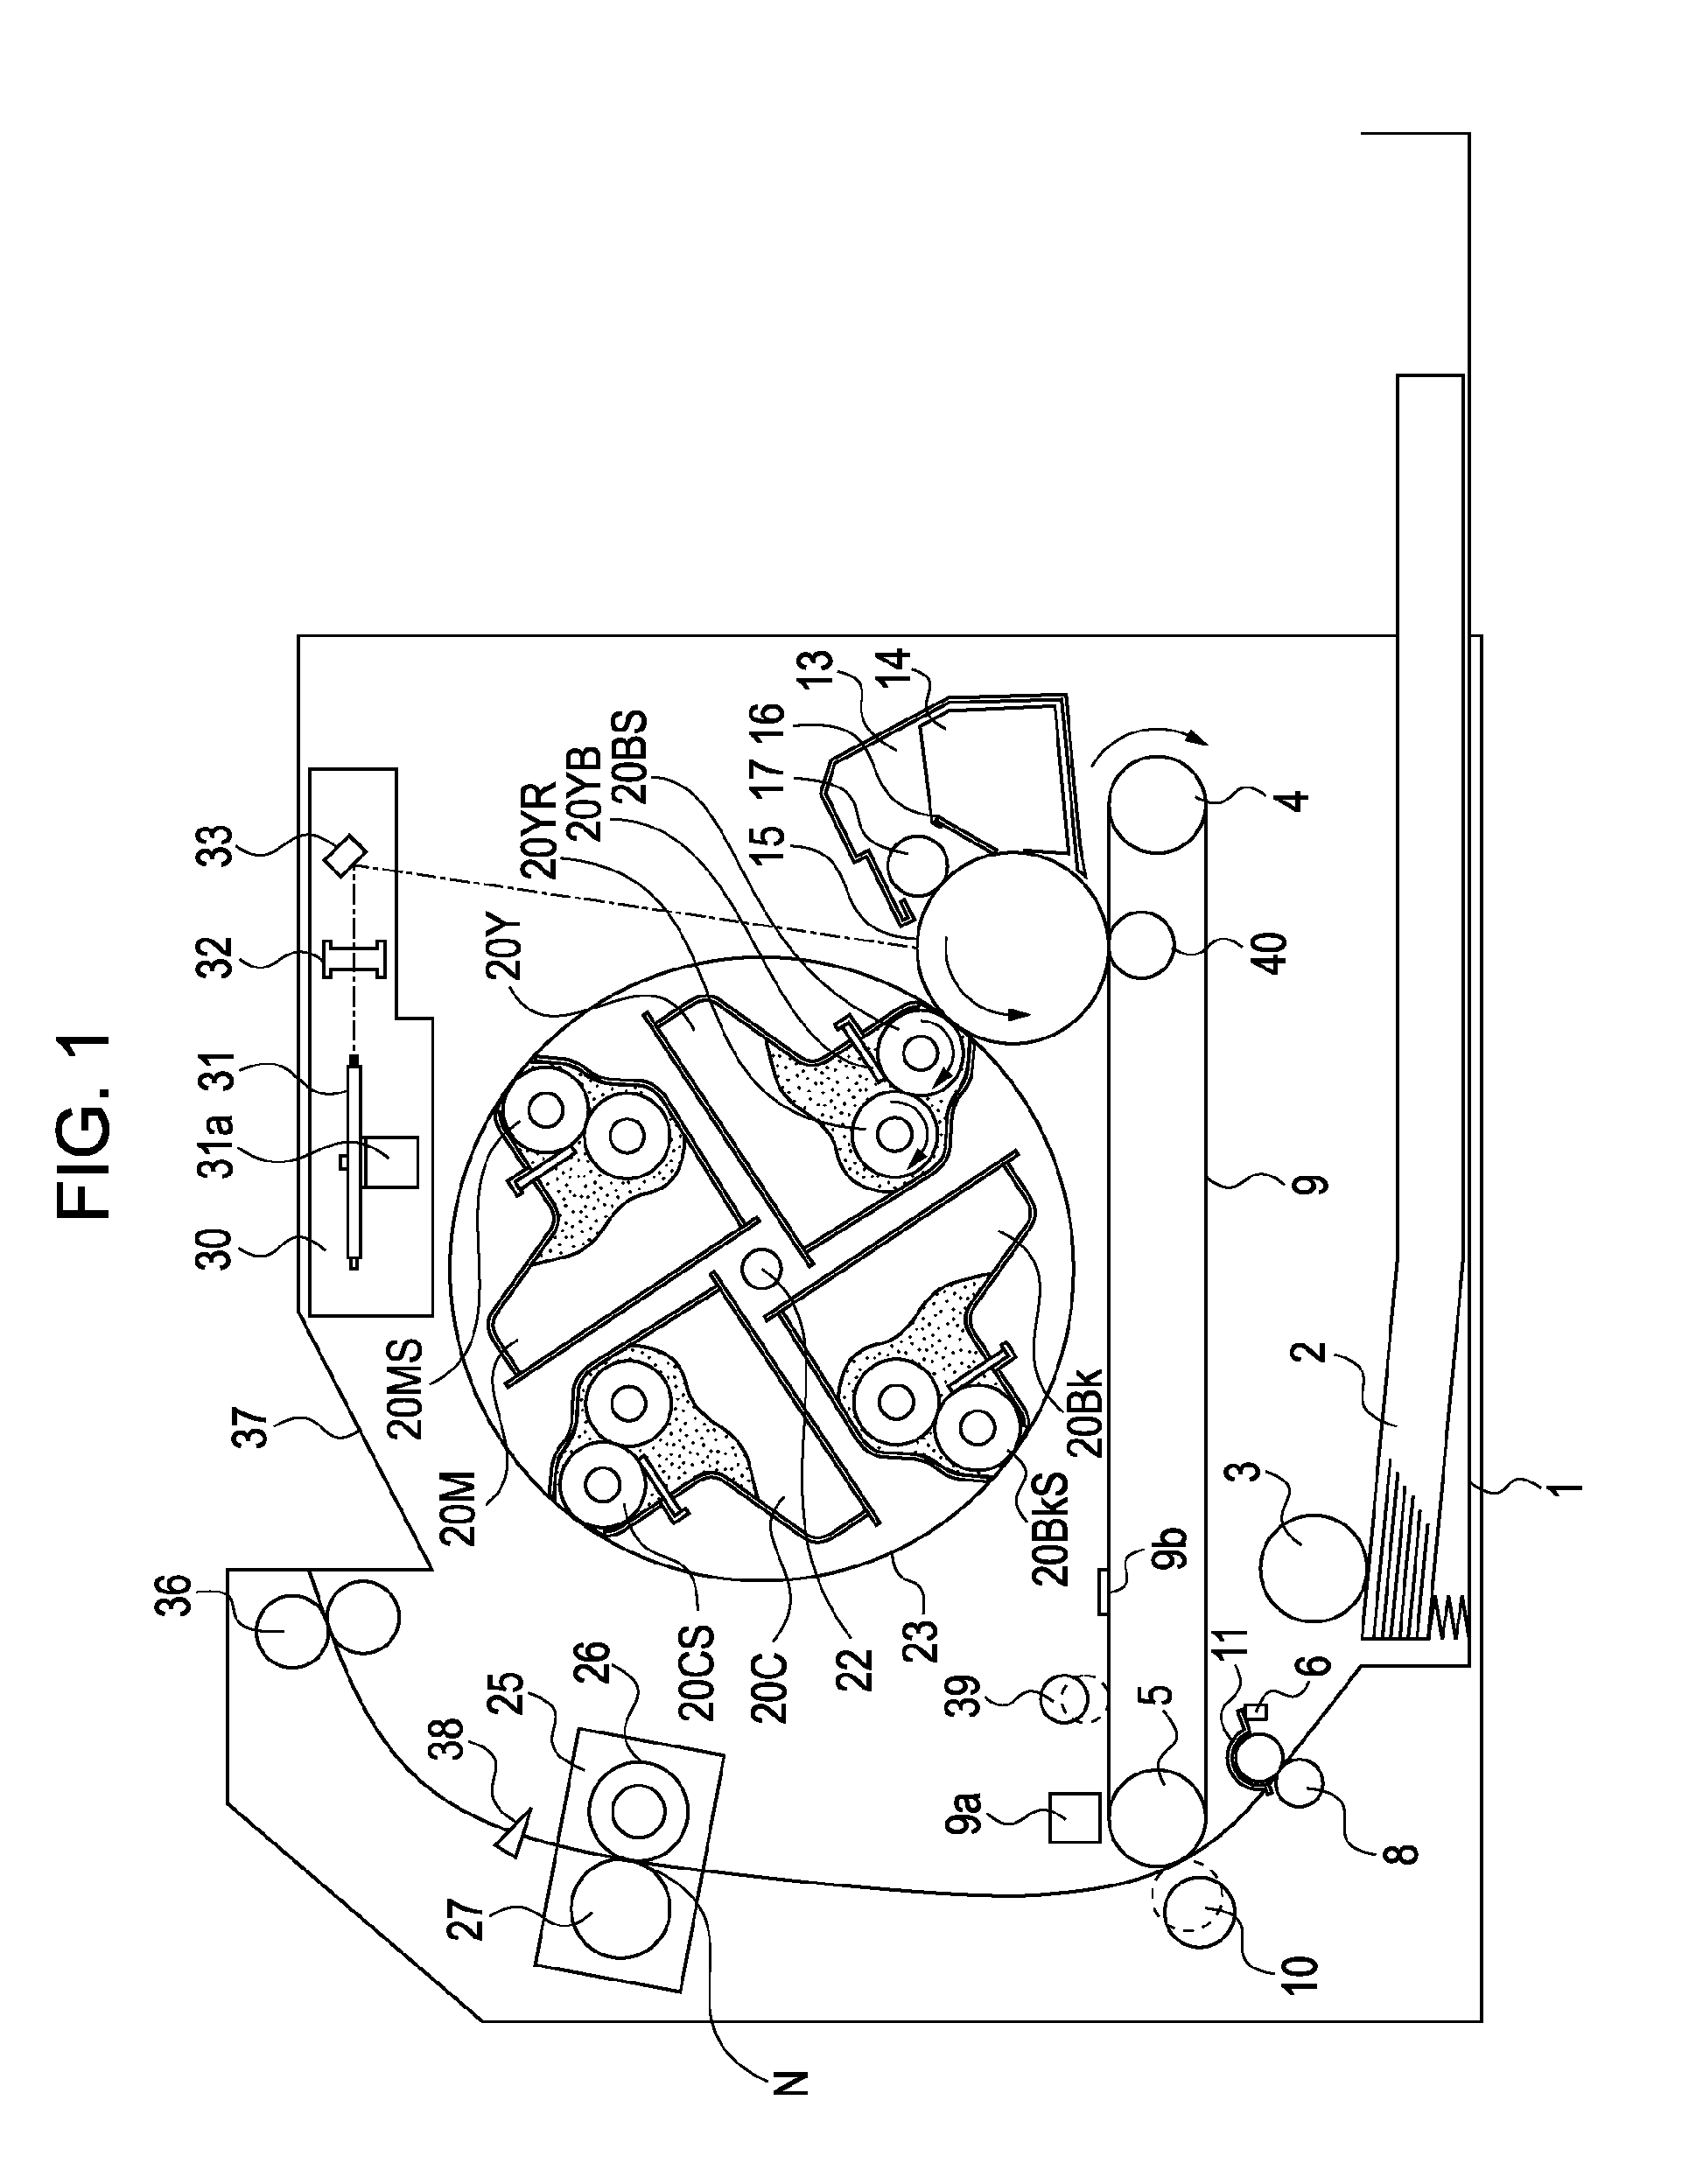 Image forming apparatus for controlling speed of intermediate transfer member according to image